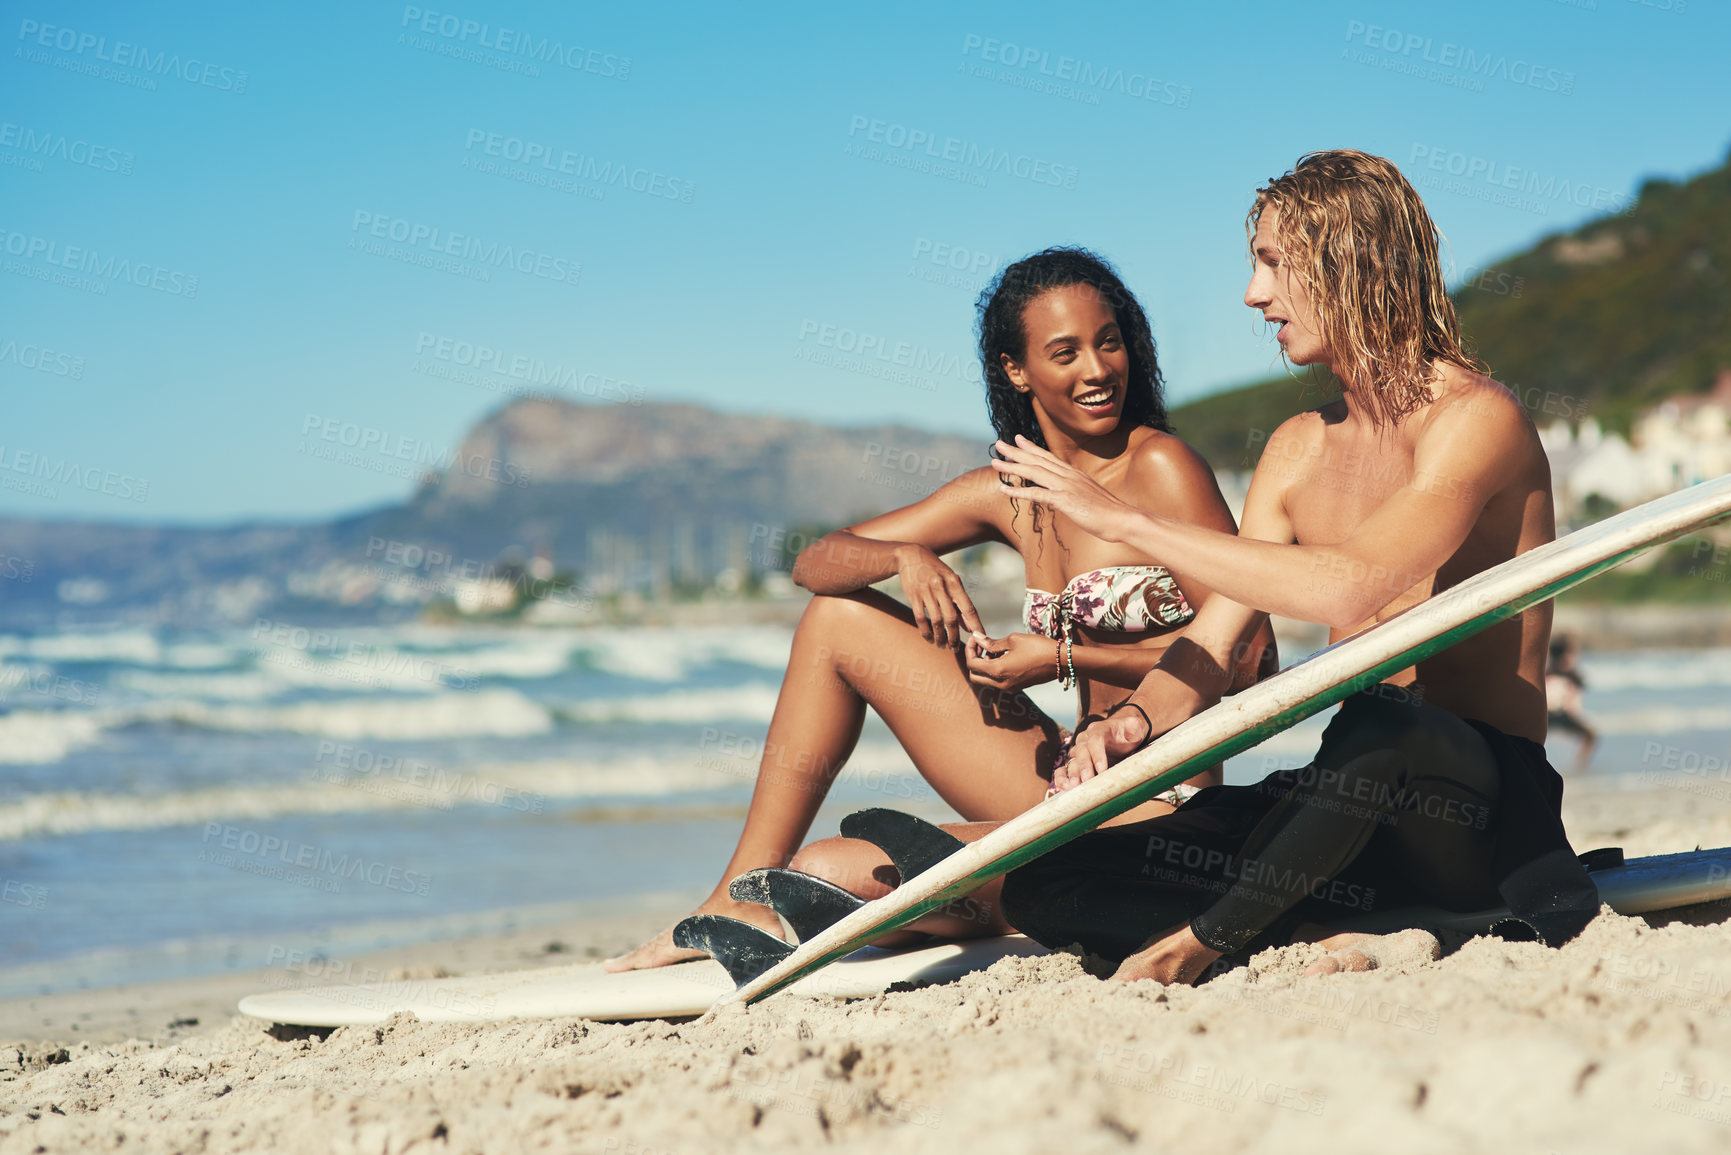 Buy stock photo Shot of a young couple sitting on the beach with their surfboards